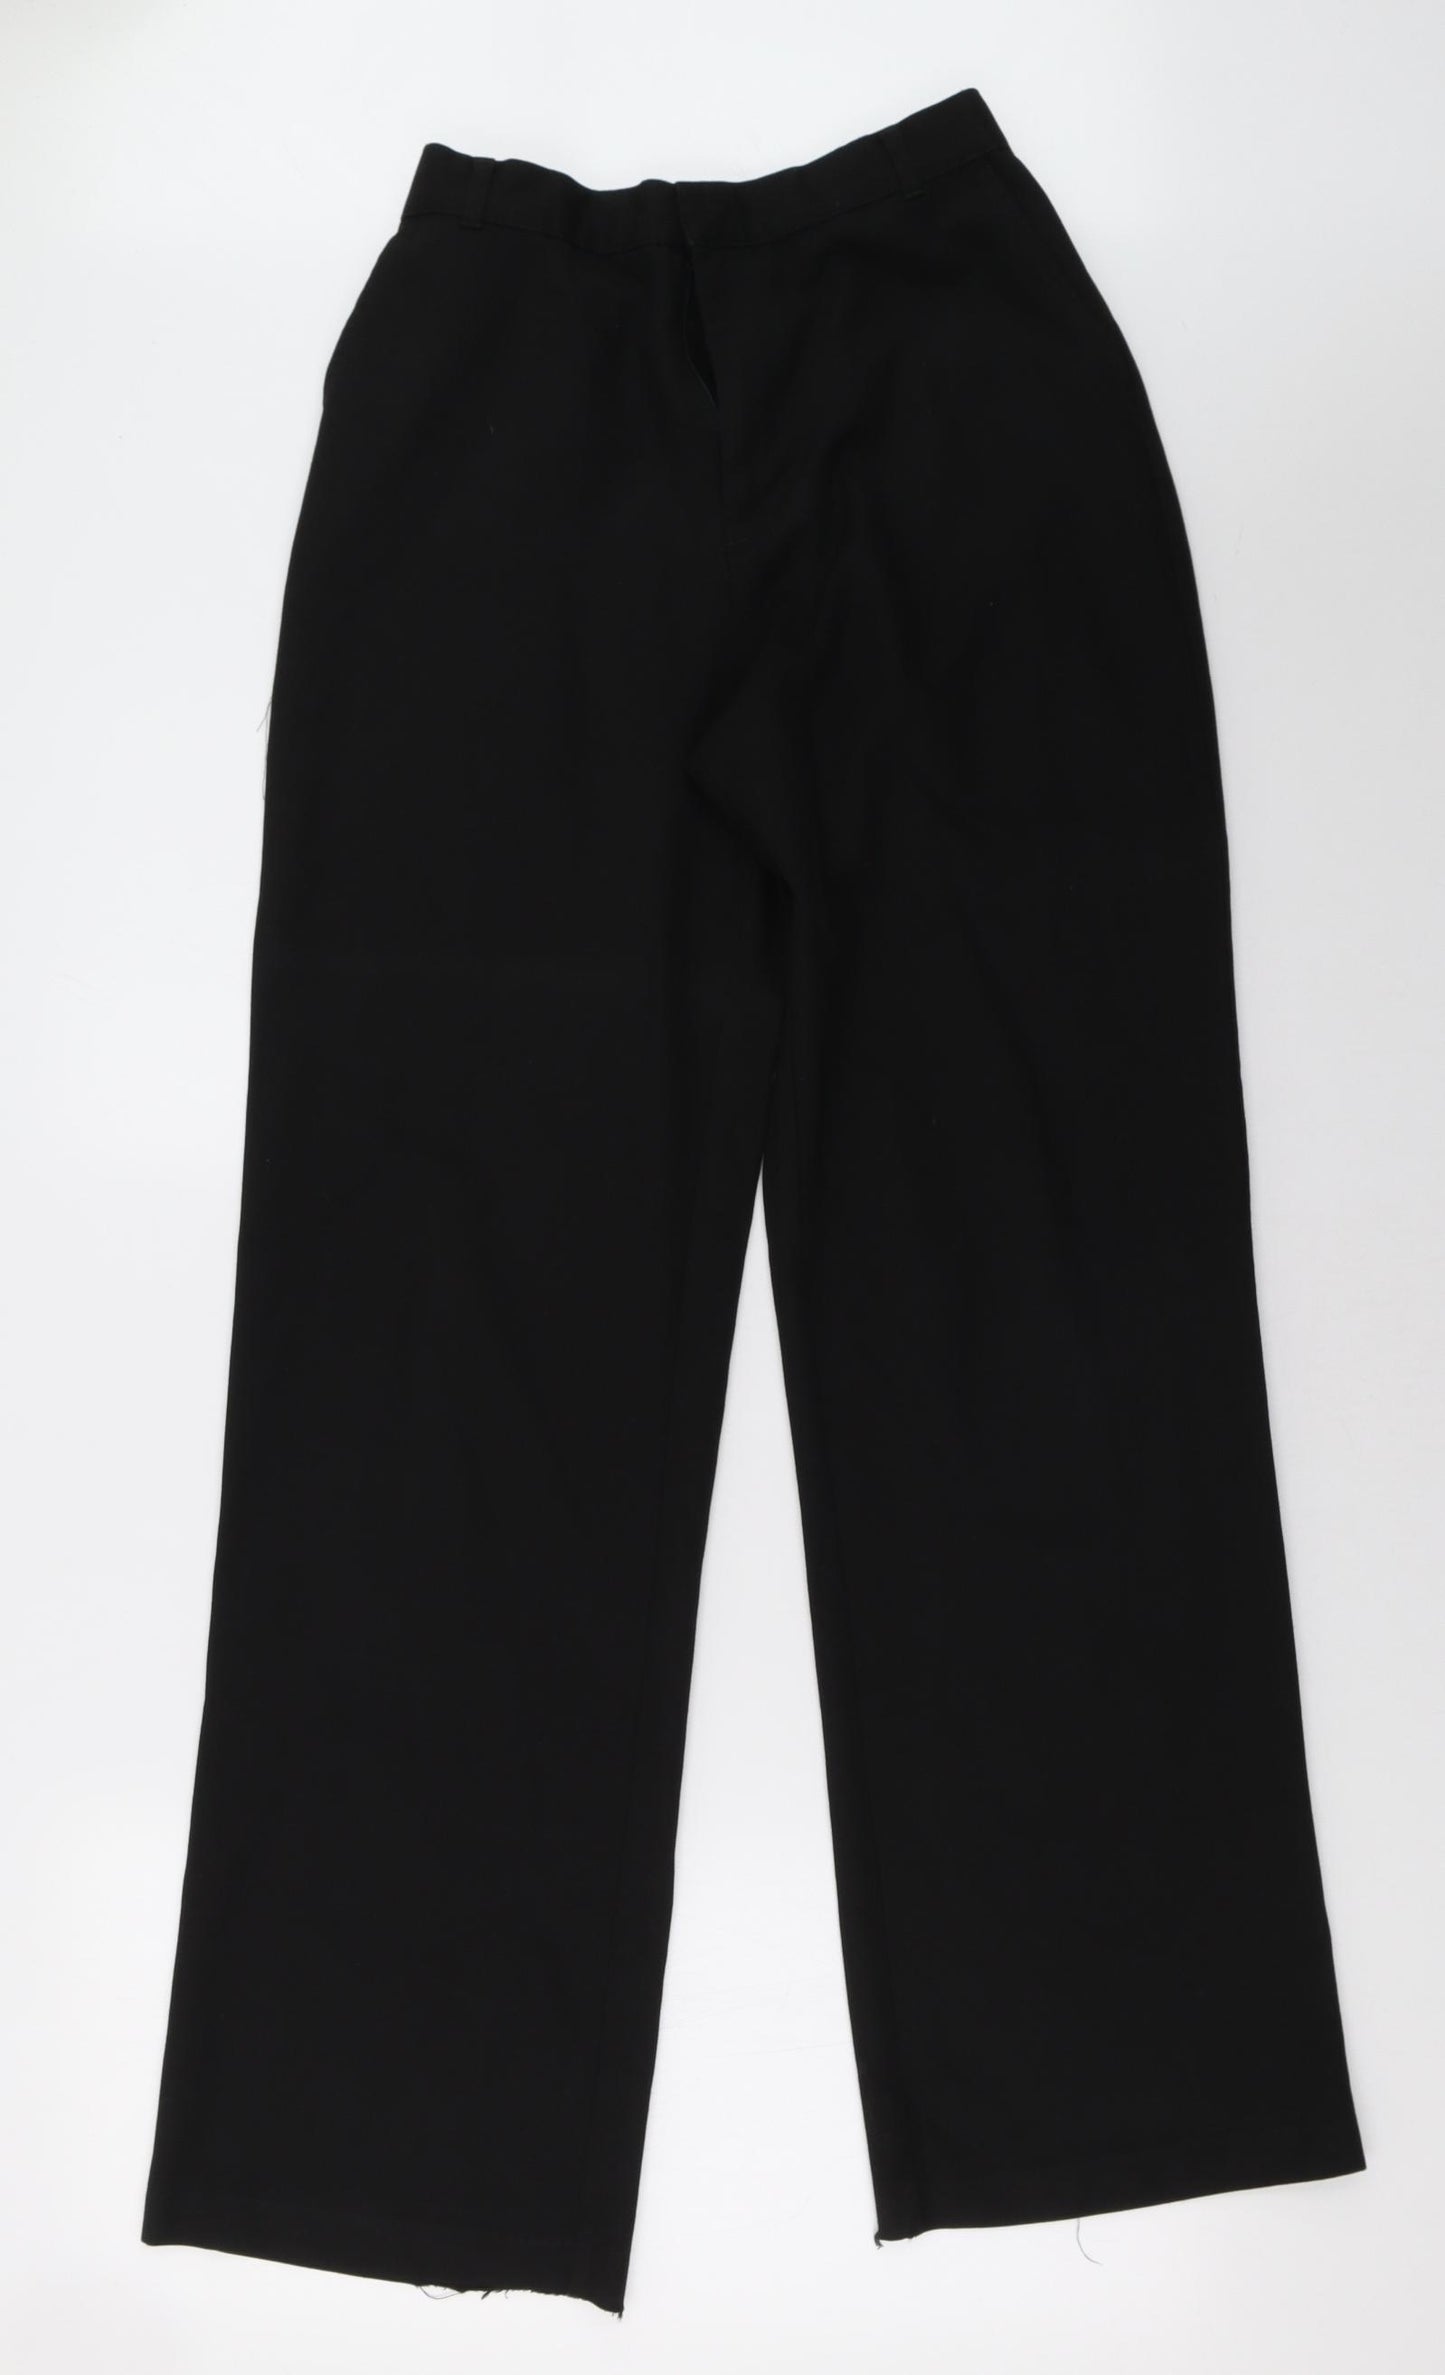 George Boys Black    Trousers Size 16 Years